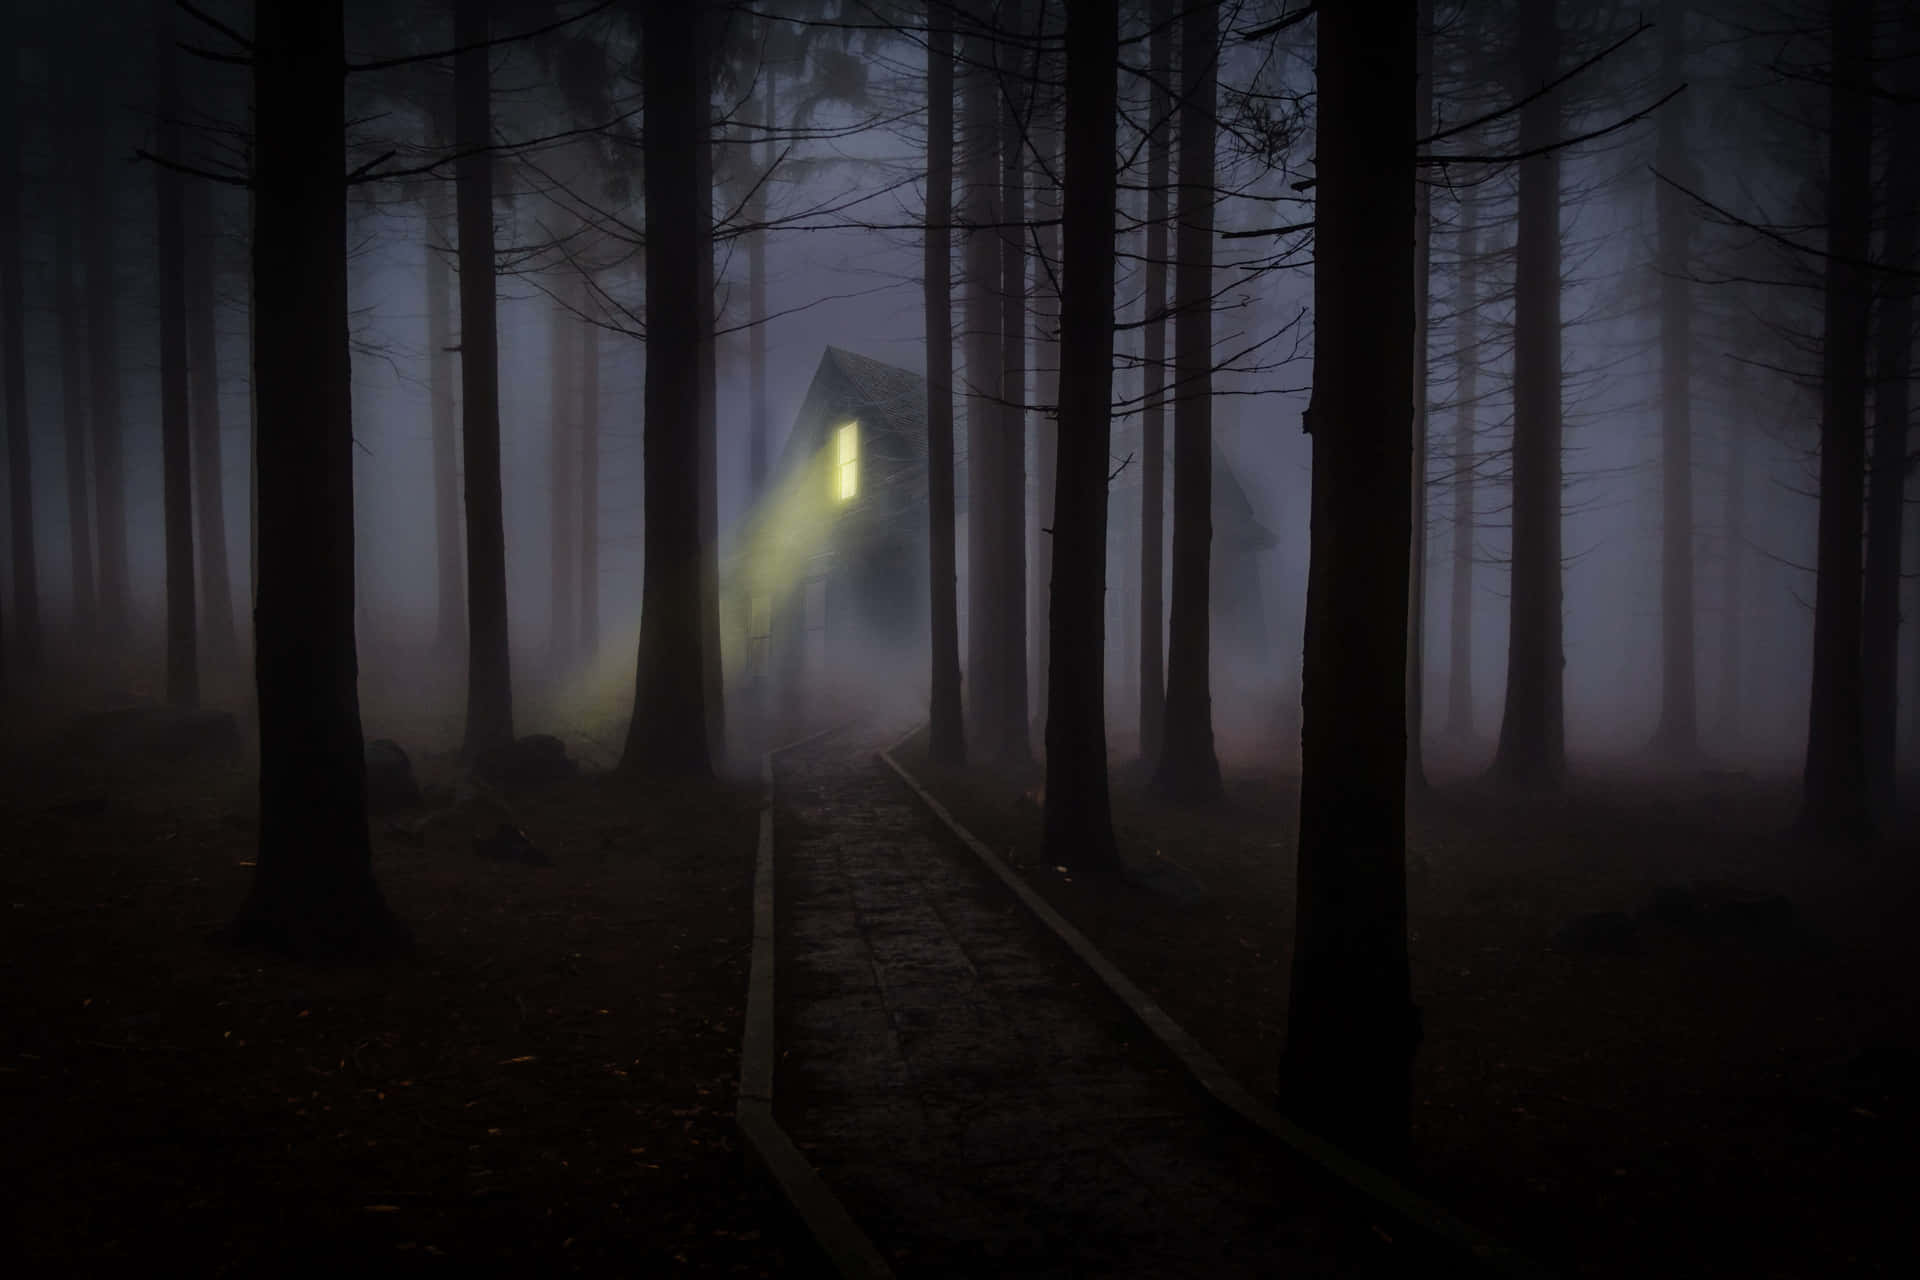 Enter the Haunted Forest at Your Own Risk Wallpaper